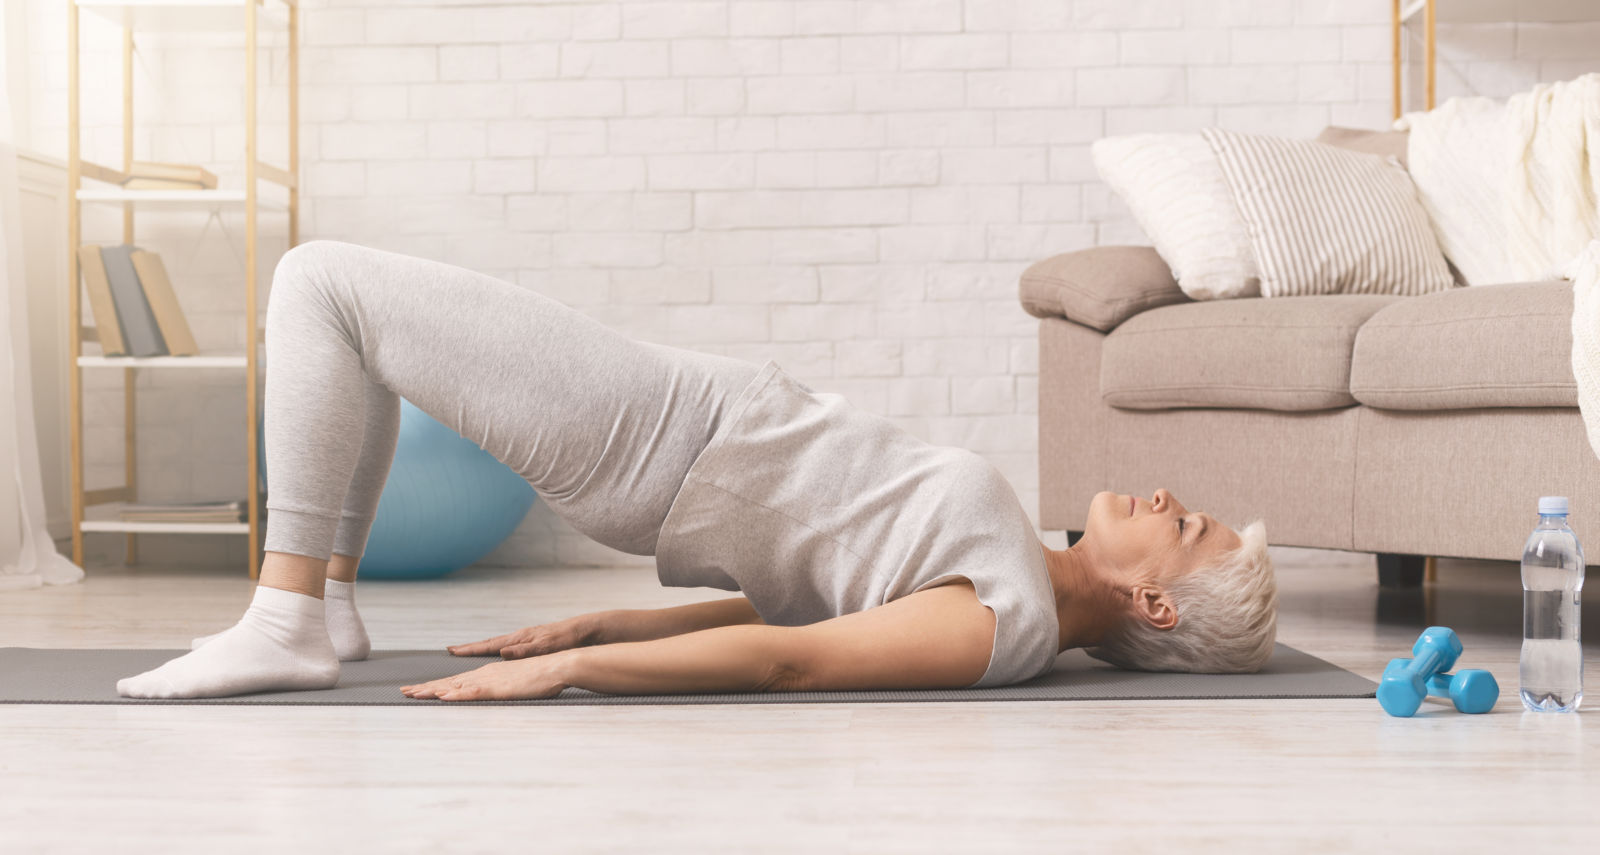 pelvic floor exercises - Aging Project UPO